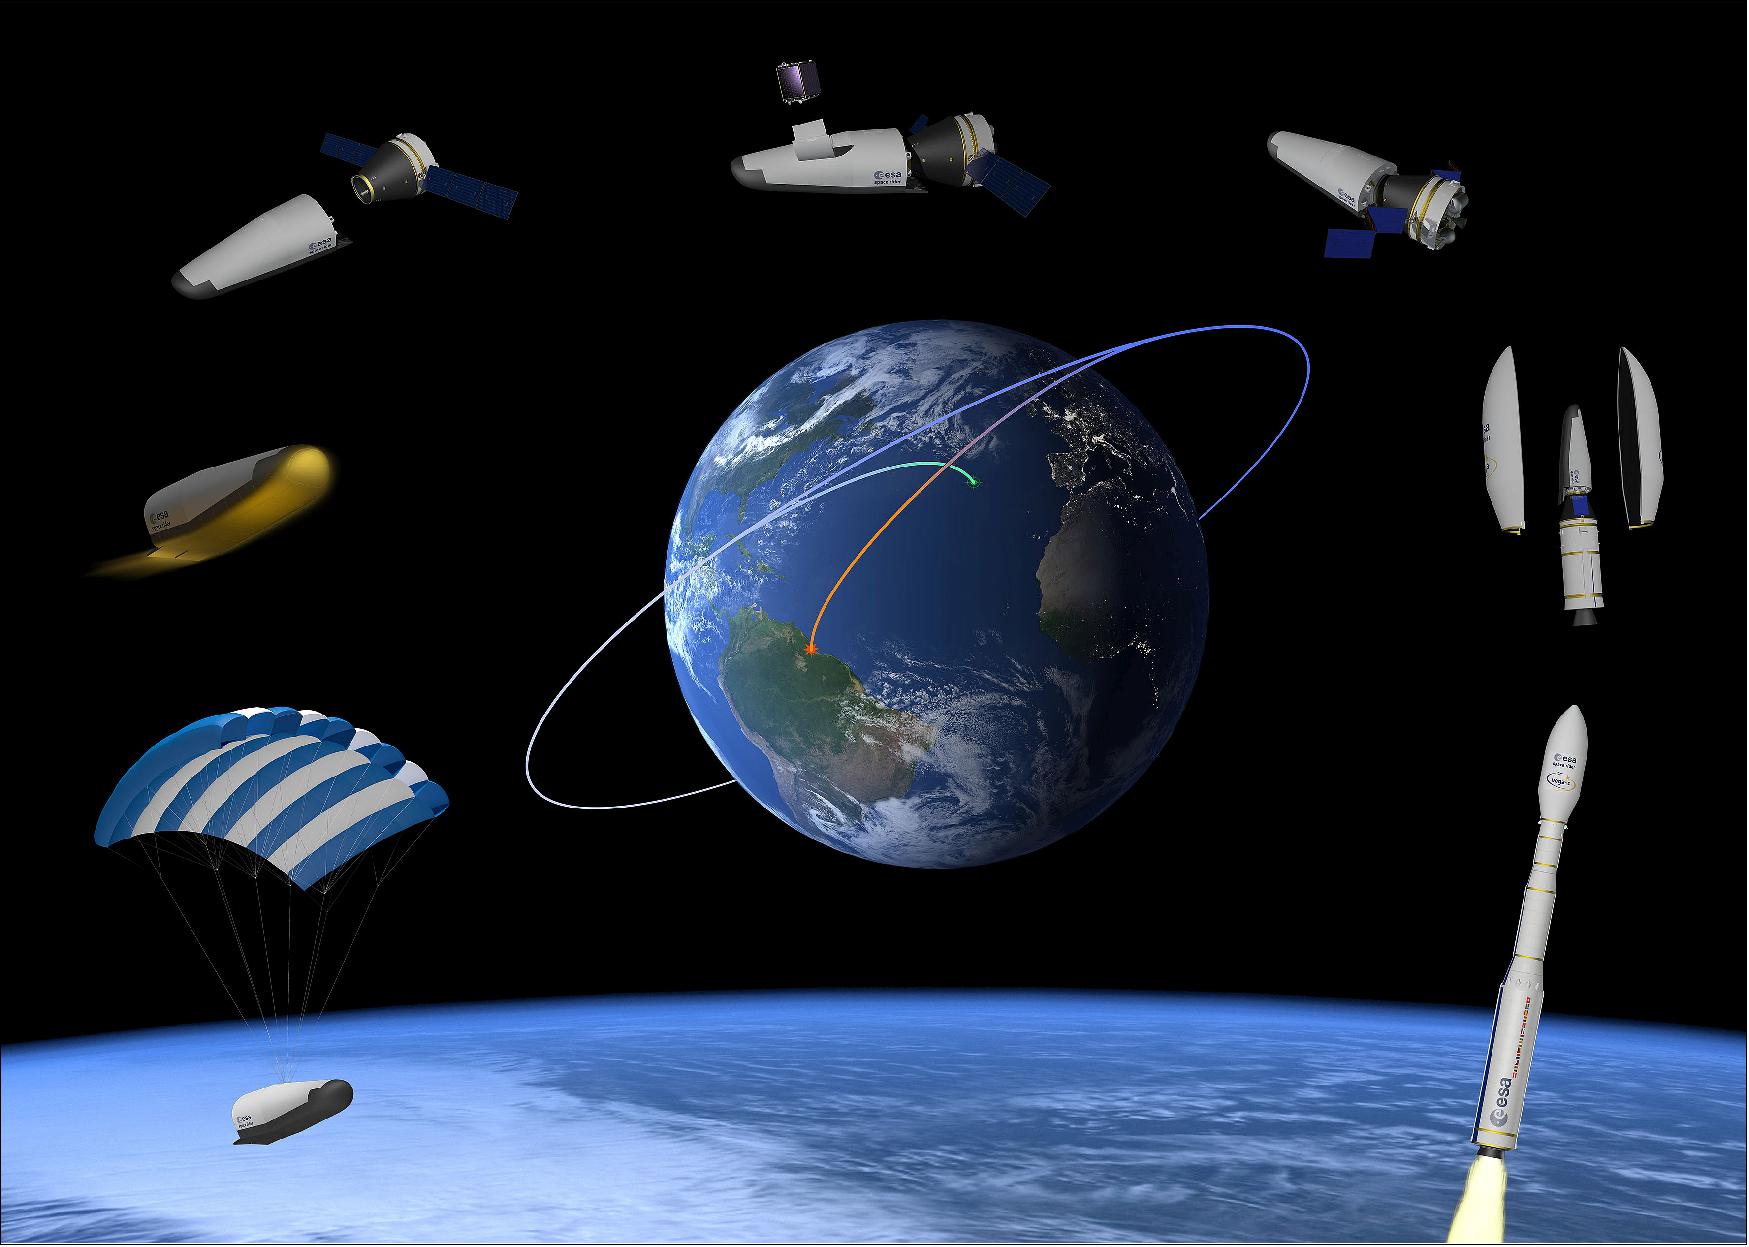 Figure 2: Space Rider mission. ESA’s Space Rider aims to provide Europe with an affordable, independent, reusable end-to-end space transportation system integrated with Vega-C, for routine access and return from low Earth orbit (image credit: ESA)